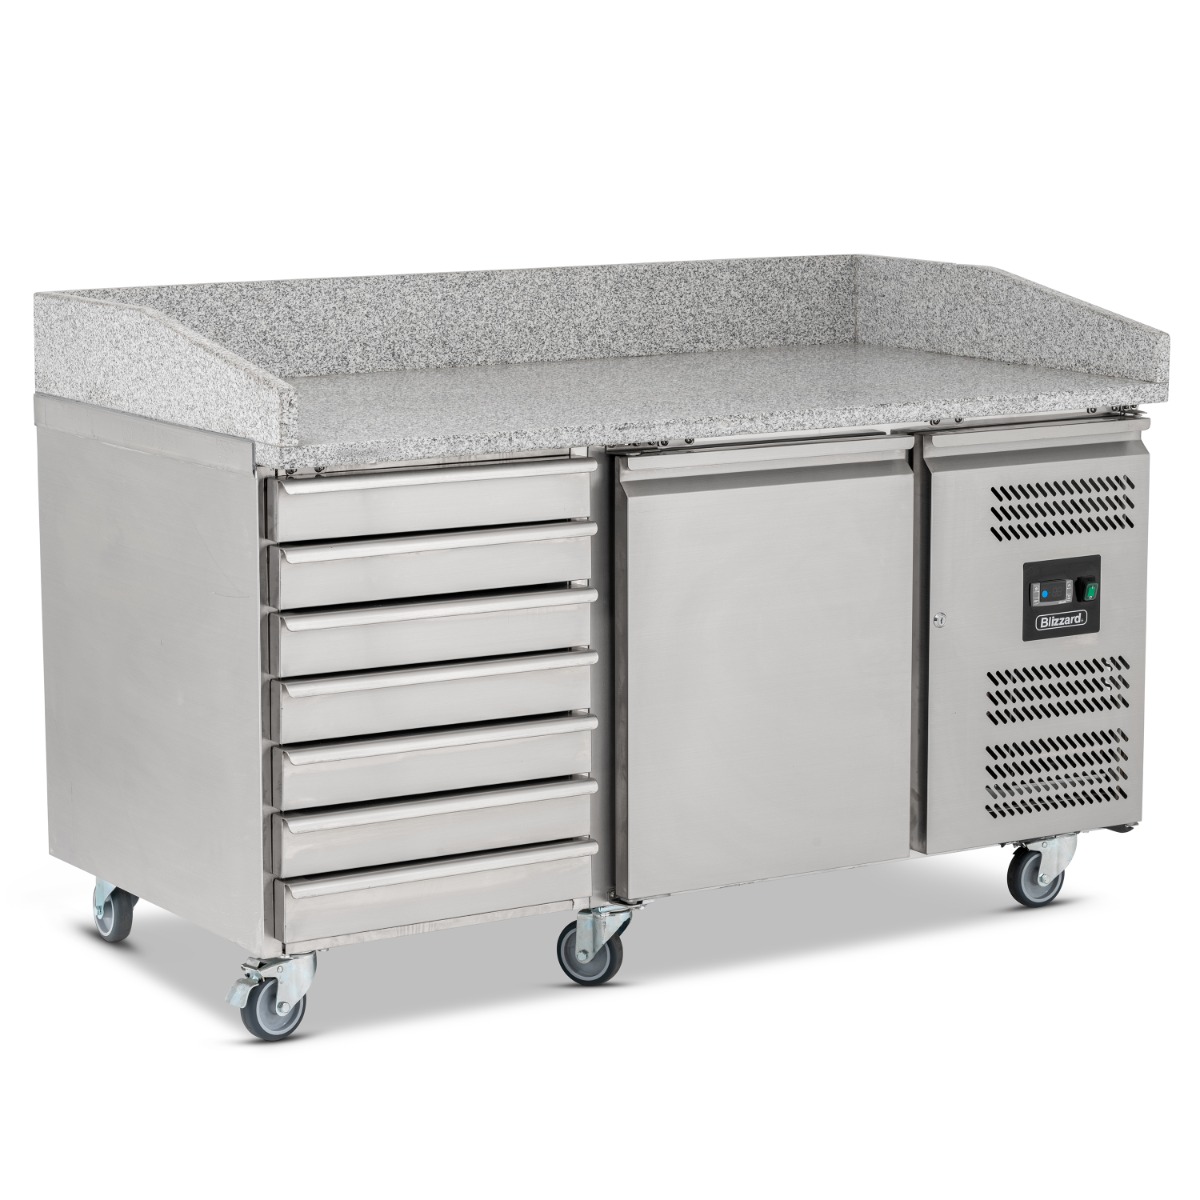 BLIZZARD 1 Dr Pizza Prep Counter with Neutral drawers 390L - BPB1500-7N